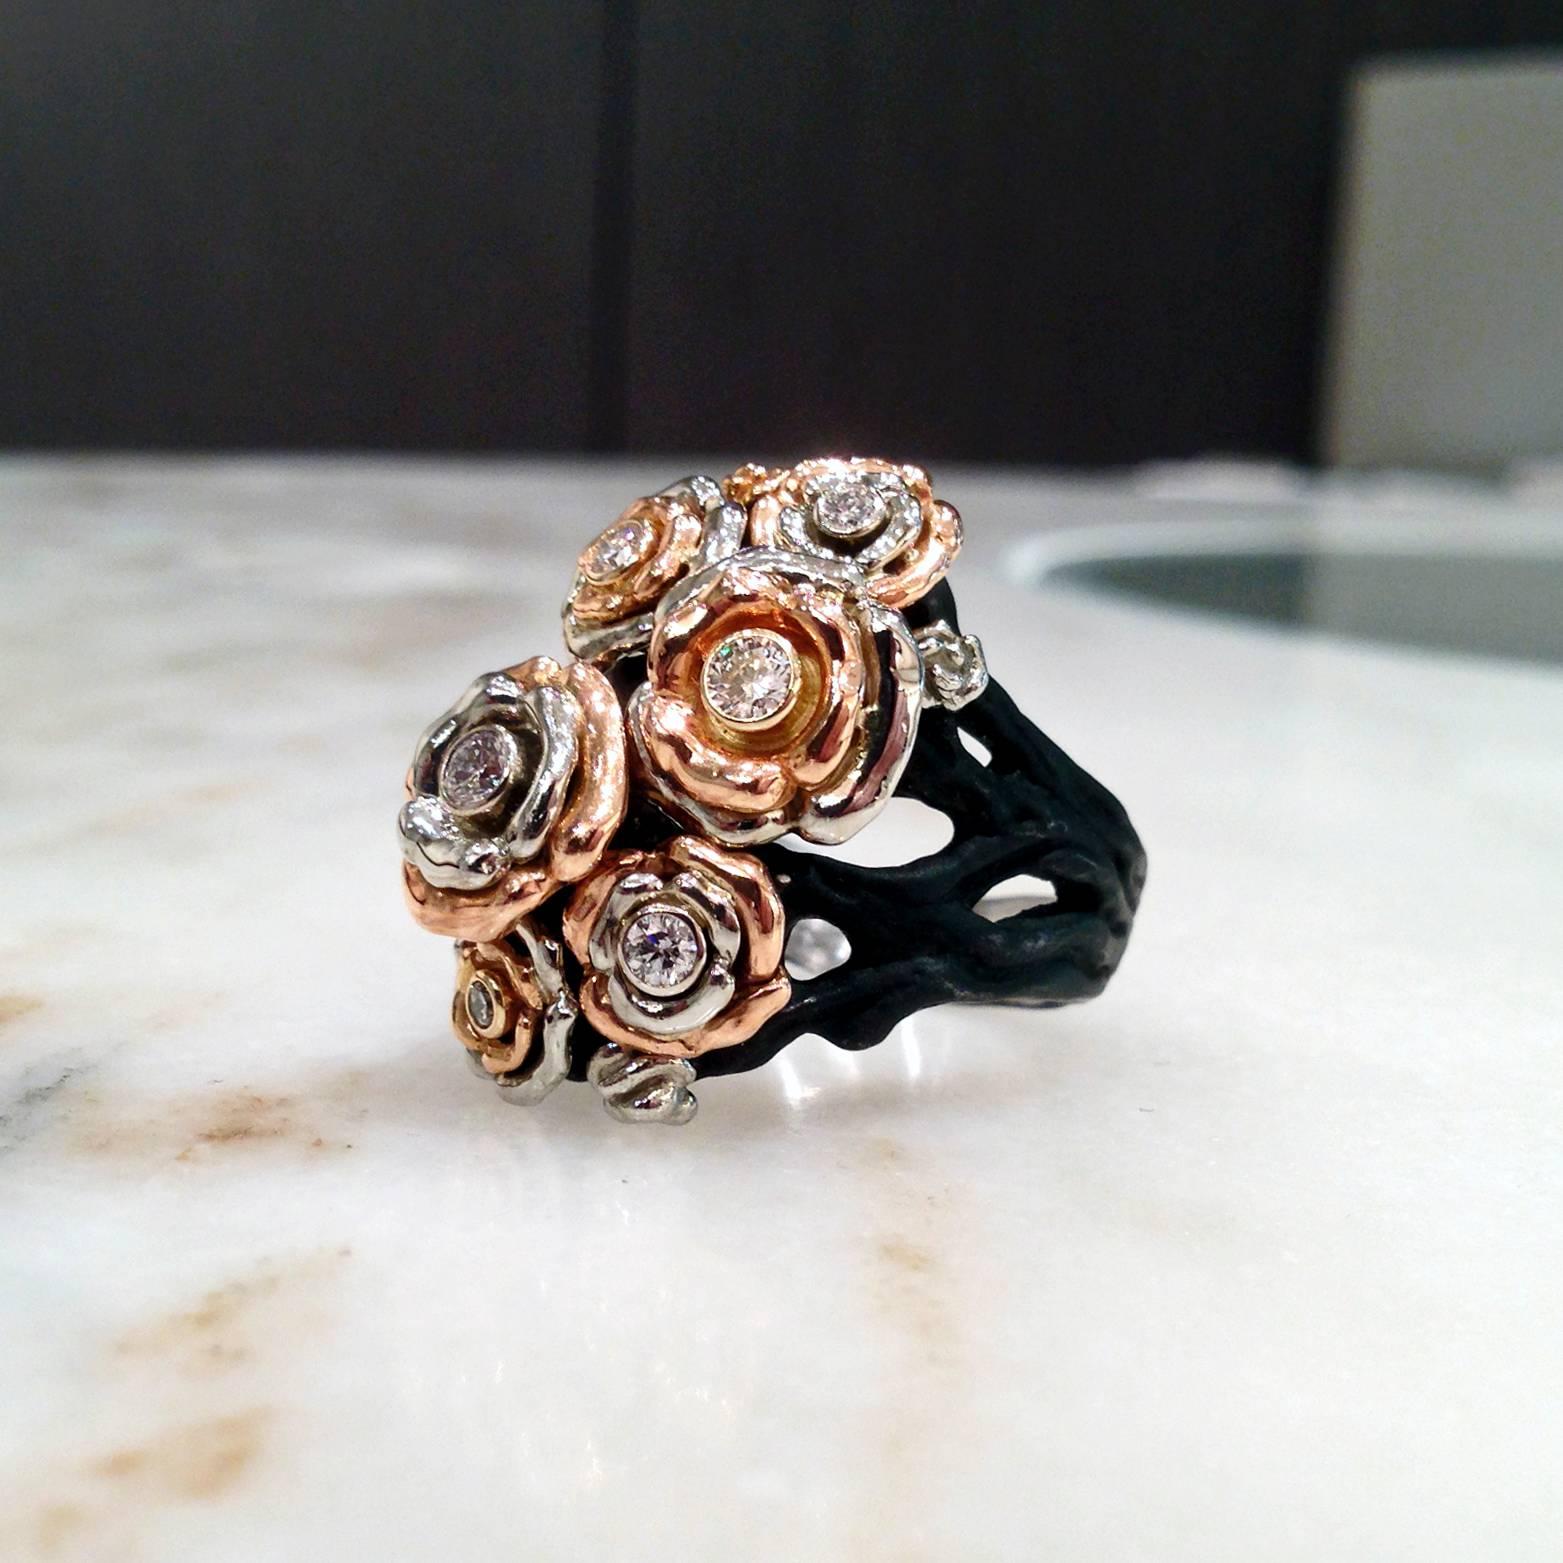 One-of-a-Kind Ring handcrafted in 18k rose gold, 18k white gold, and cobalt chrome accented with 0.36 carats of round brilliant-cut white diamonds in assorted sizes. 18k white gold interior shank. Size 10.25 (Can be sized).